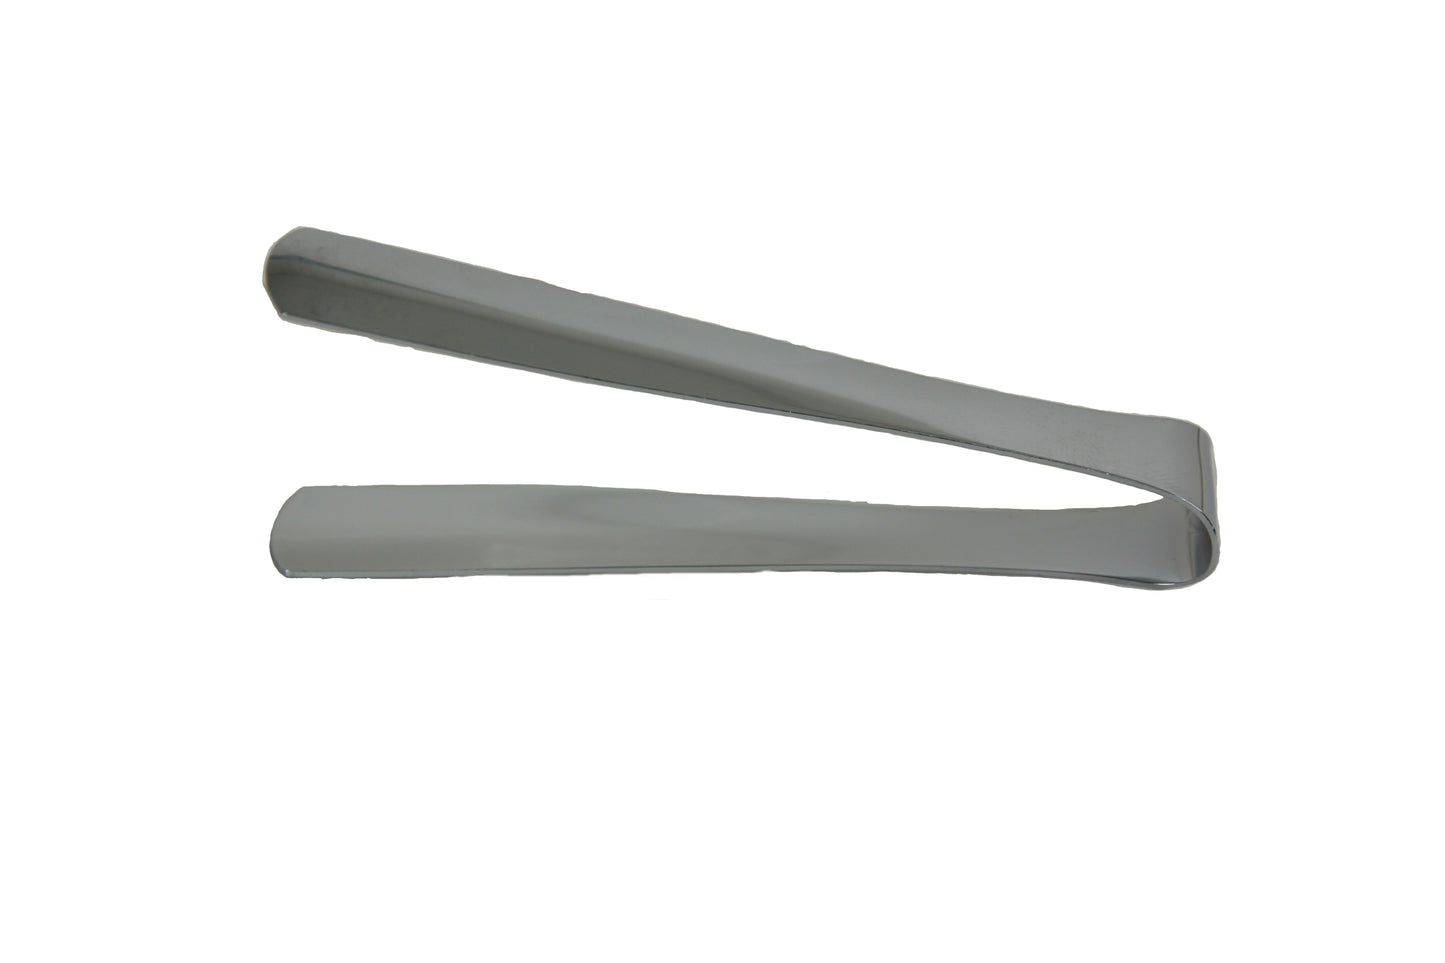 steel wick snuffer is perfect for extinguishing candlesticks.